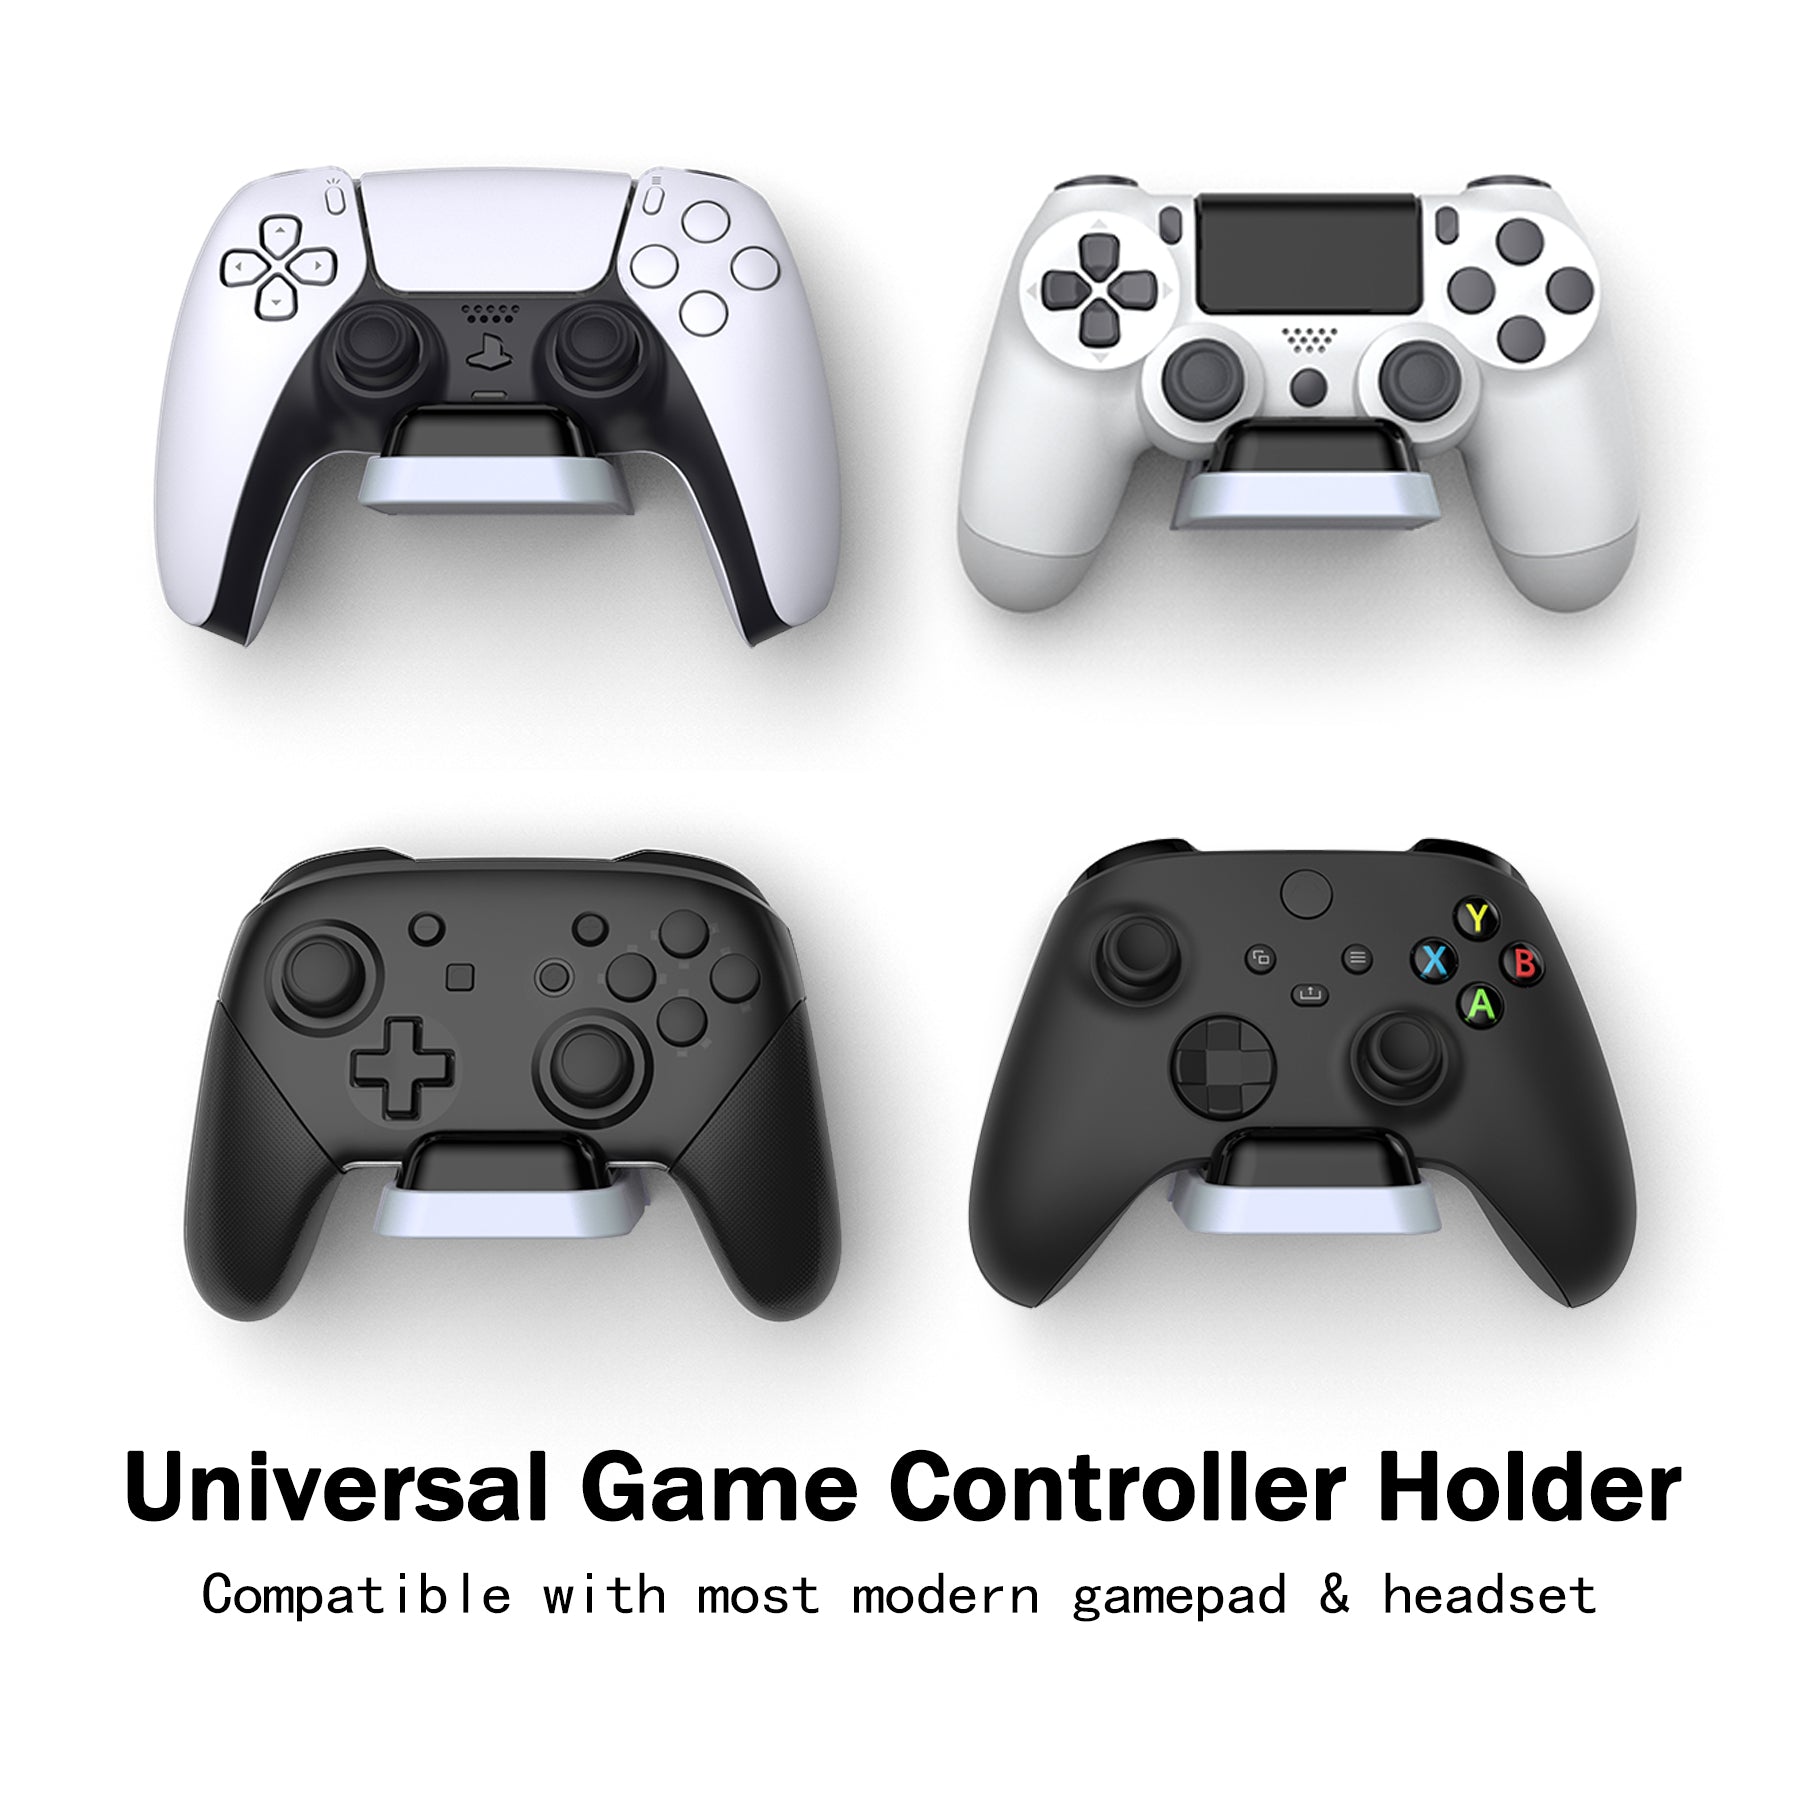 PlayVital 2 Pack Universal Game Controller Wall Mount for ps5 & Headset, Wall Stand for Xbox Series Controller, Wall Holder for Switch Pro Controller, Dedicated Console Hanger Mode for ps5 - Black & White - PFPJ093 playvital